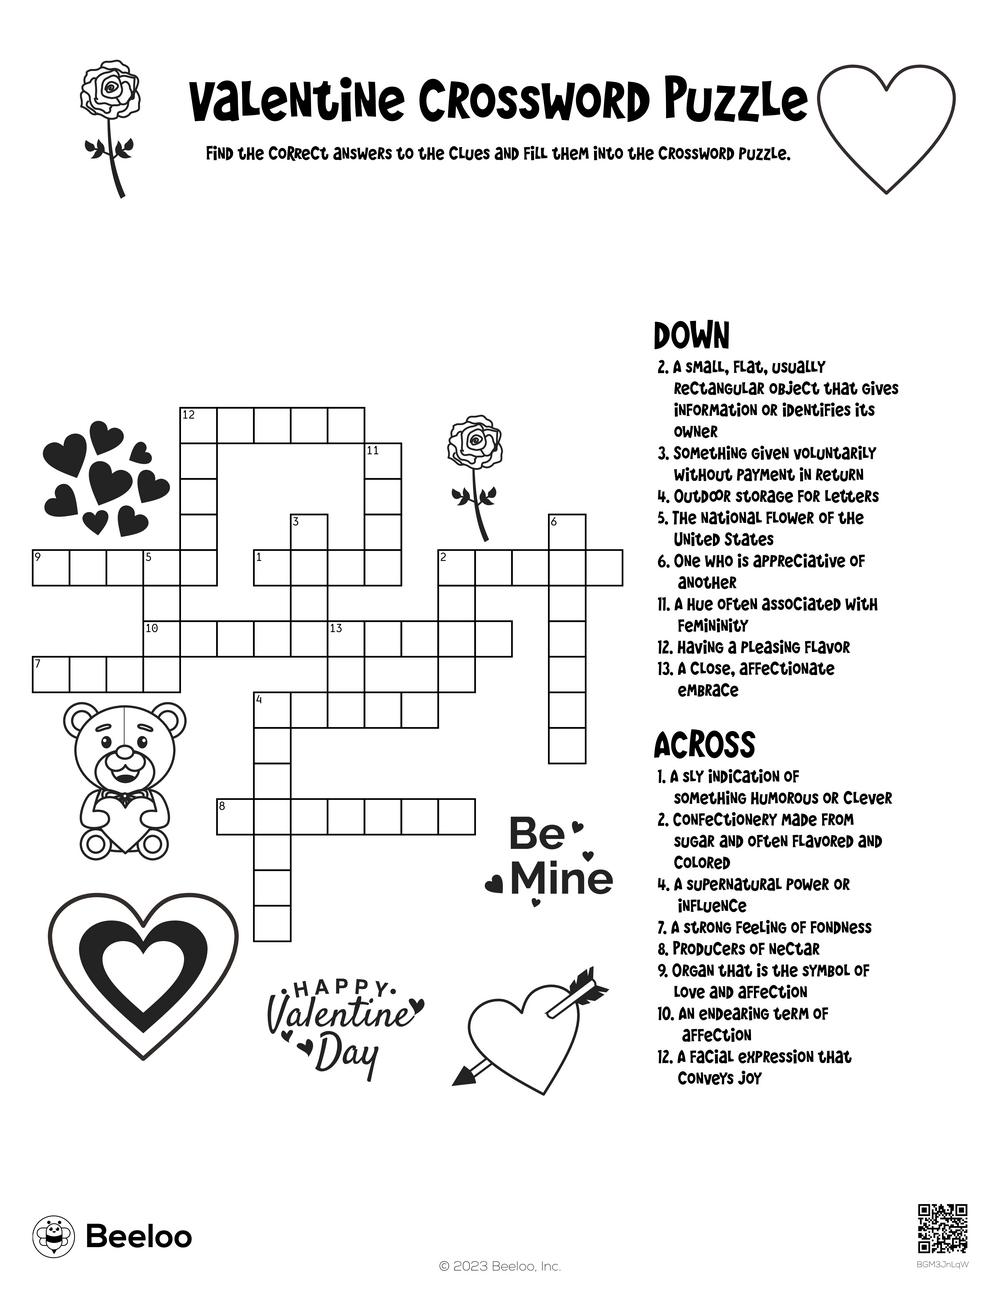 Valentine crossword puzzle â printable crafts and activities for kids